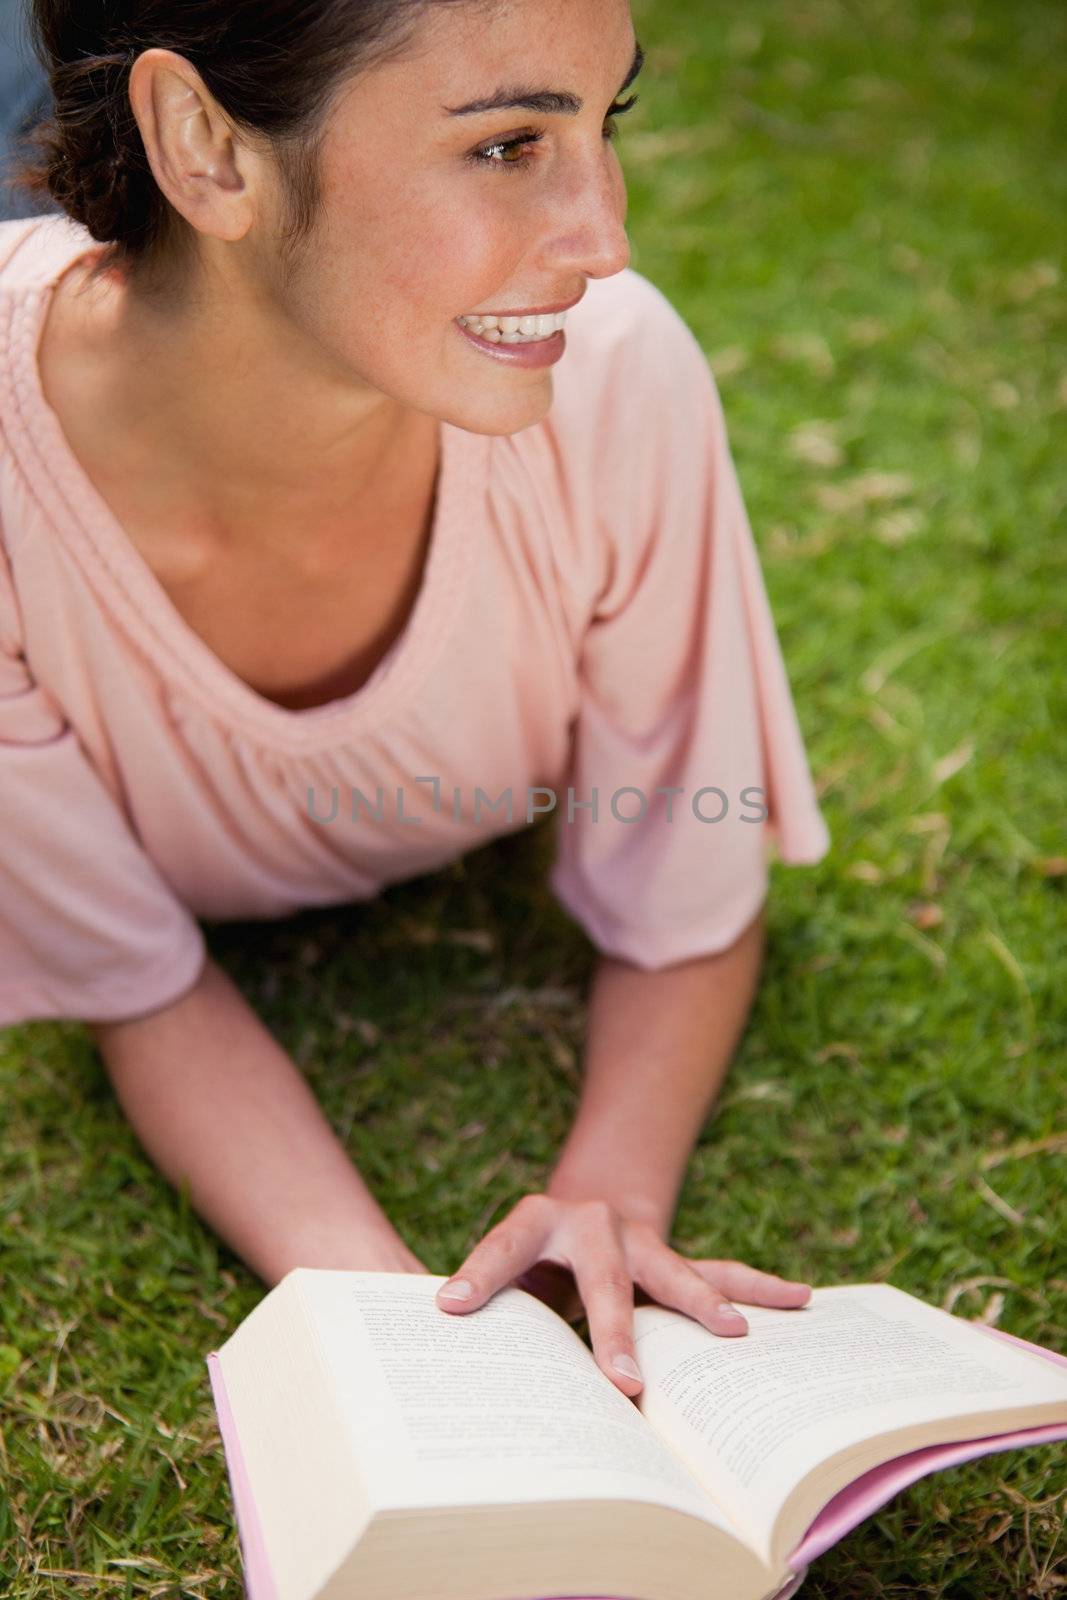 Woman looking towards the side while reading a book as she is lying down in grass